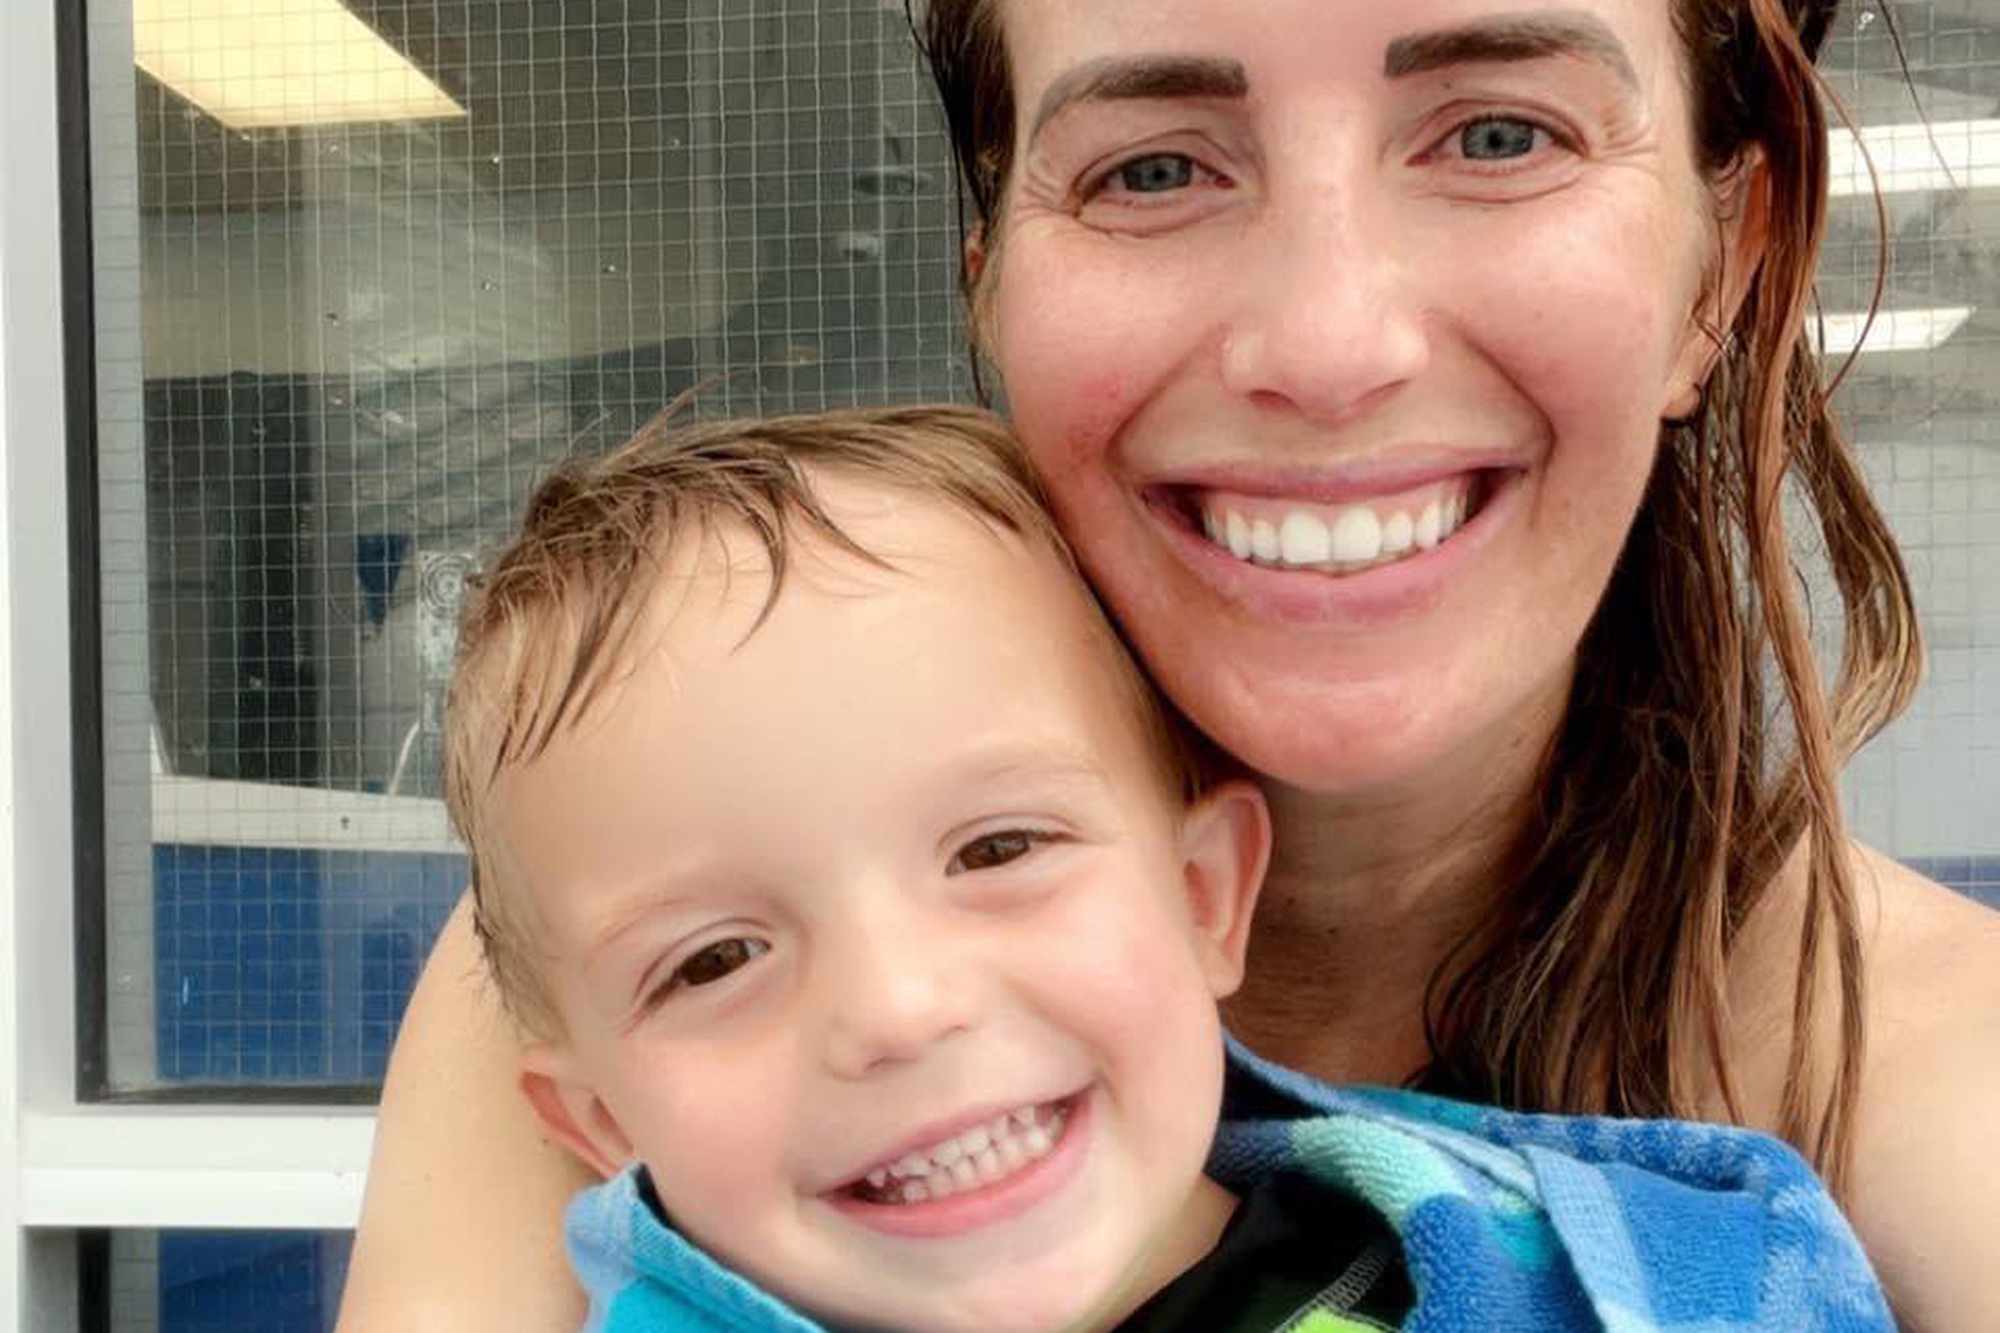 Levi Wright's Mom Speaks Out After 3-Year-Old Son's Death: 'I Will Lose Sleep Over This for Eternity'